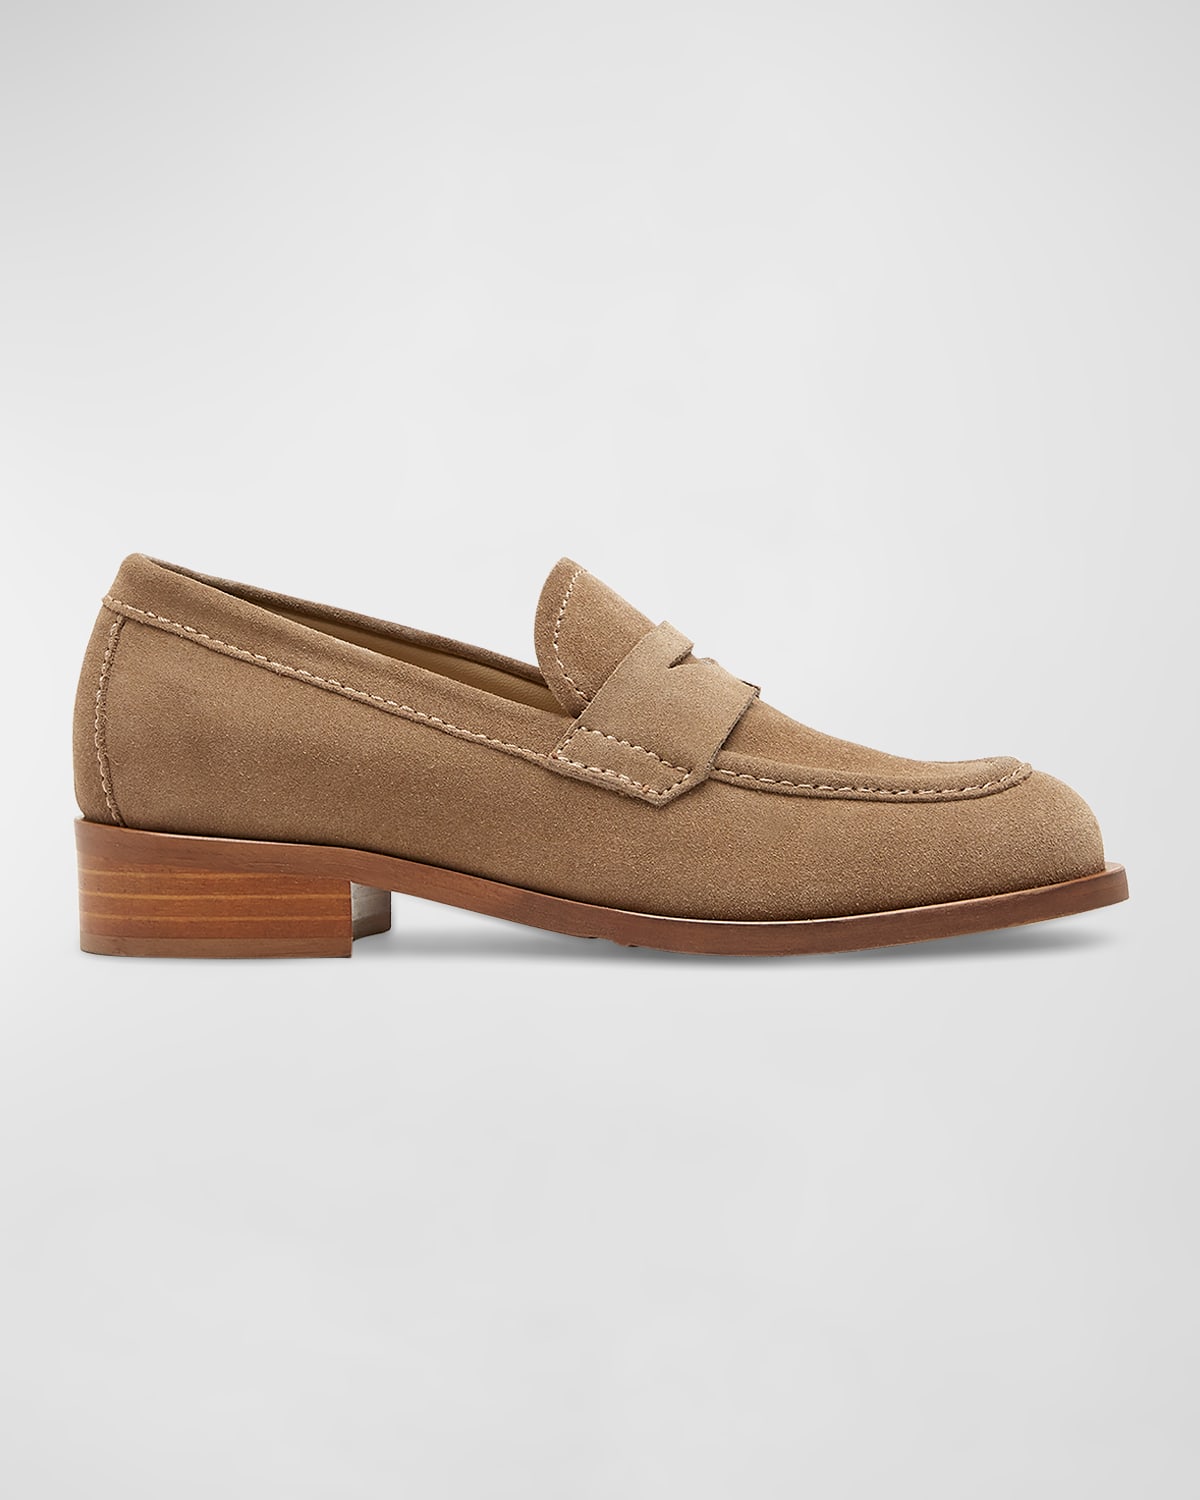 Dominic Suede Penny Loafers